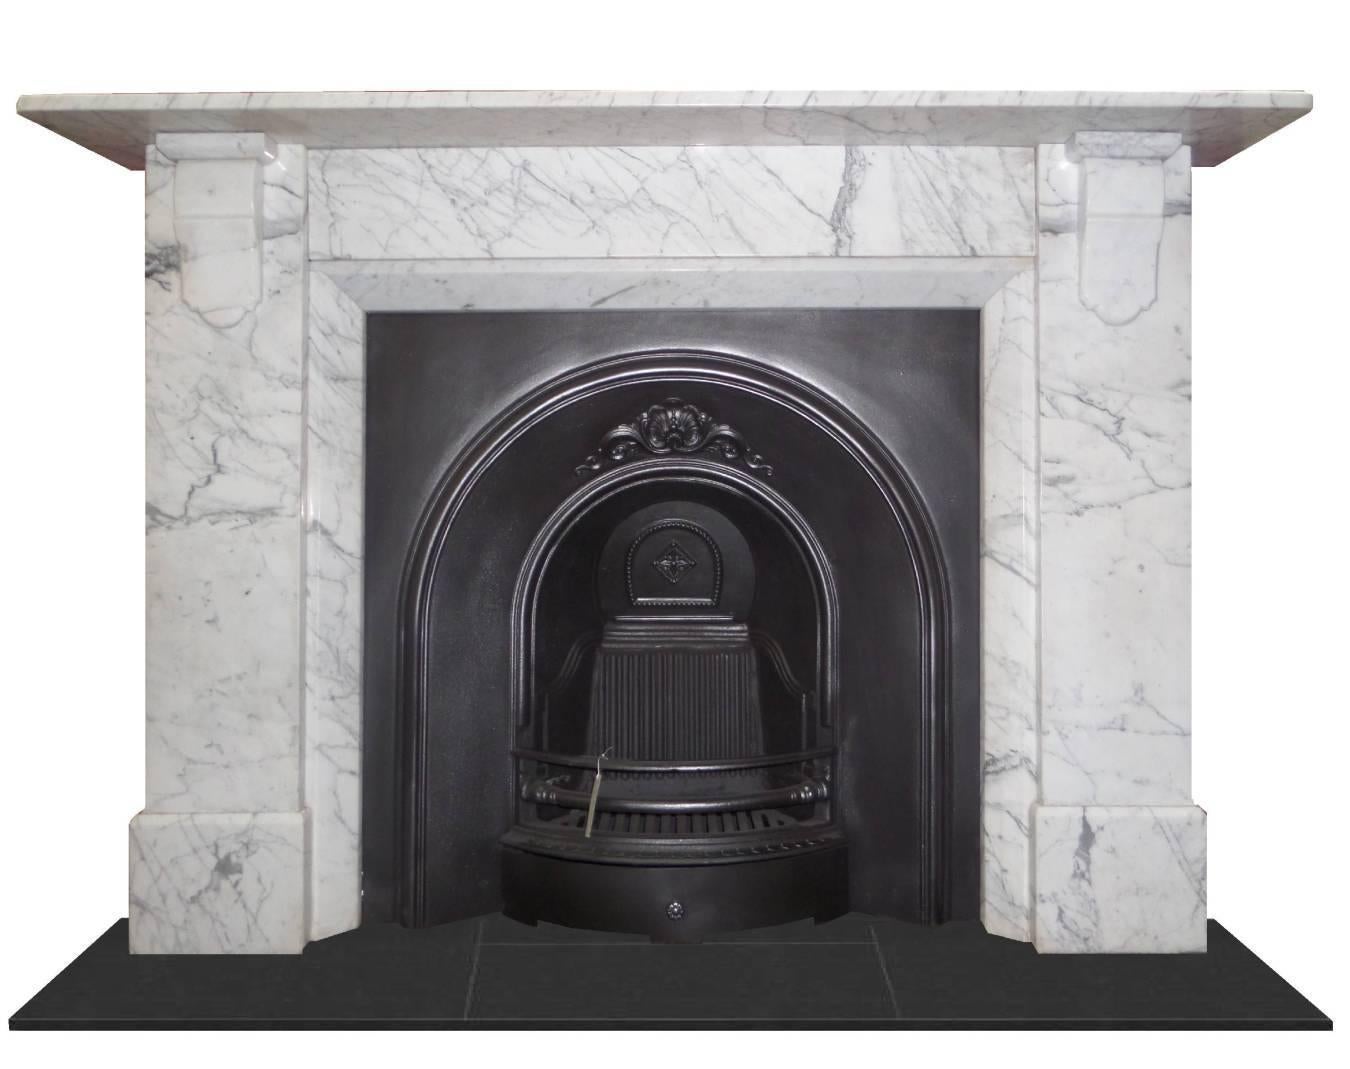 Antique restored Edwardian Carrara marble chimney piece. Shown with a traditional insert and a modern stove installation. The surround is colonial in design from the early 1900s and has been restored to a high standard. We now have video available